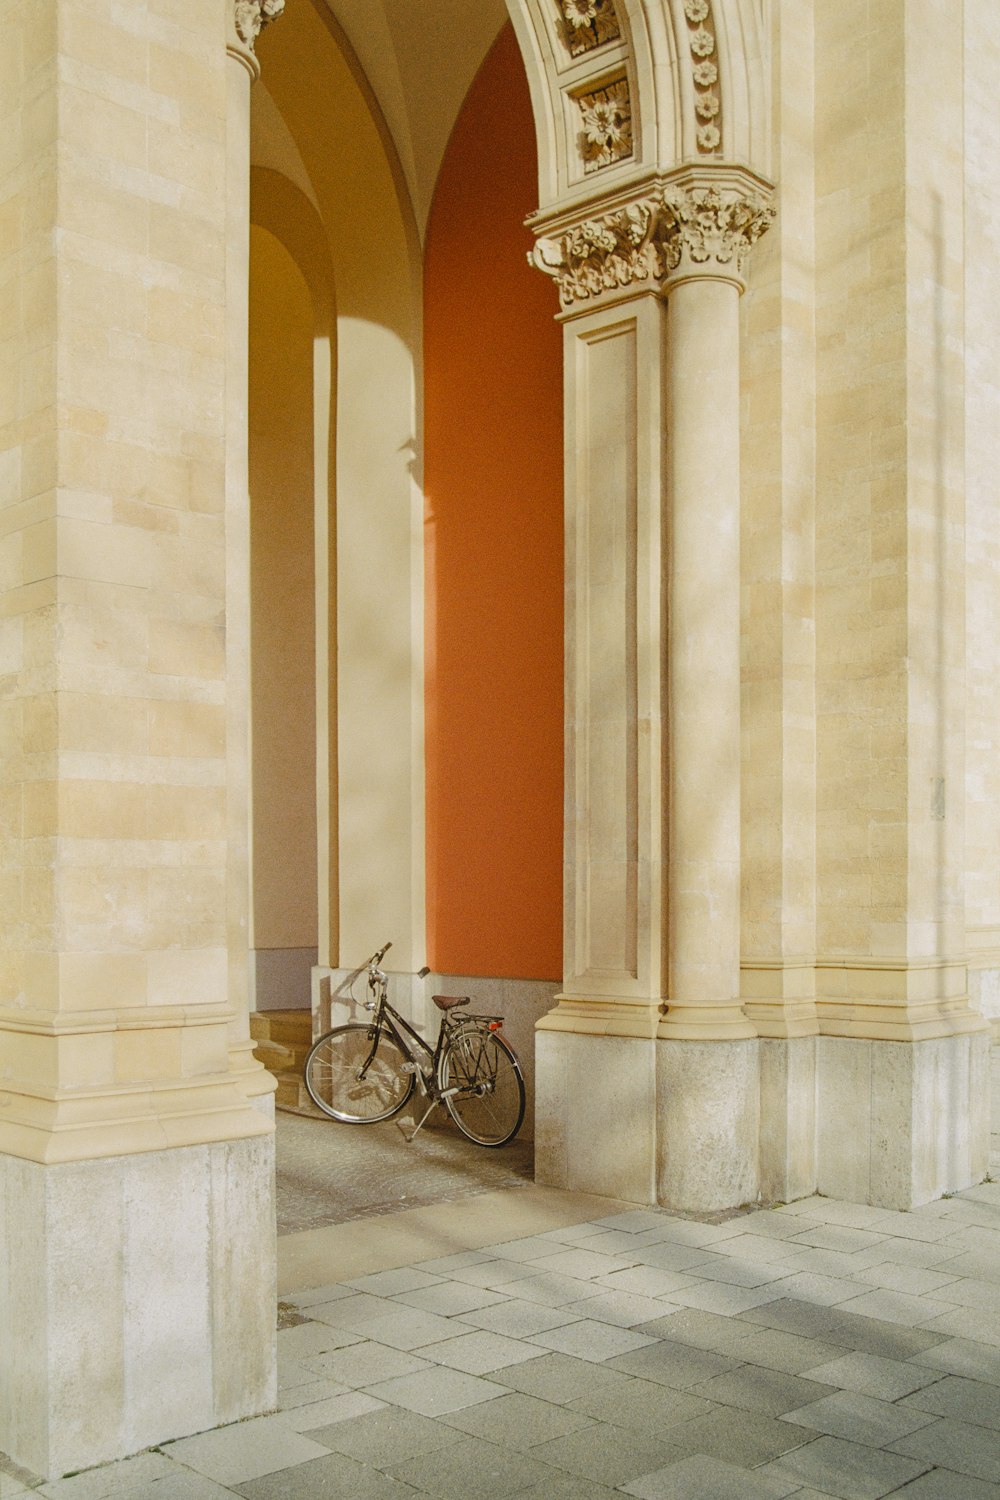 a bike is parked in an archway of a building